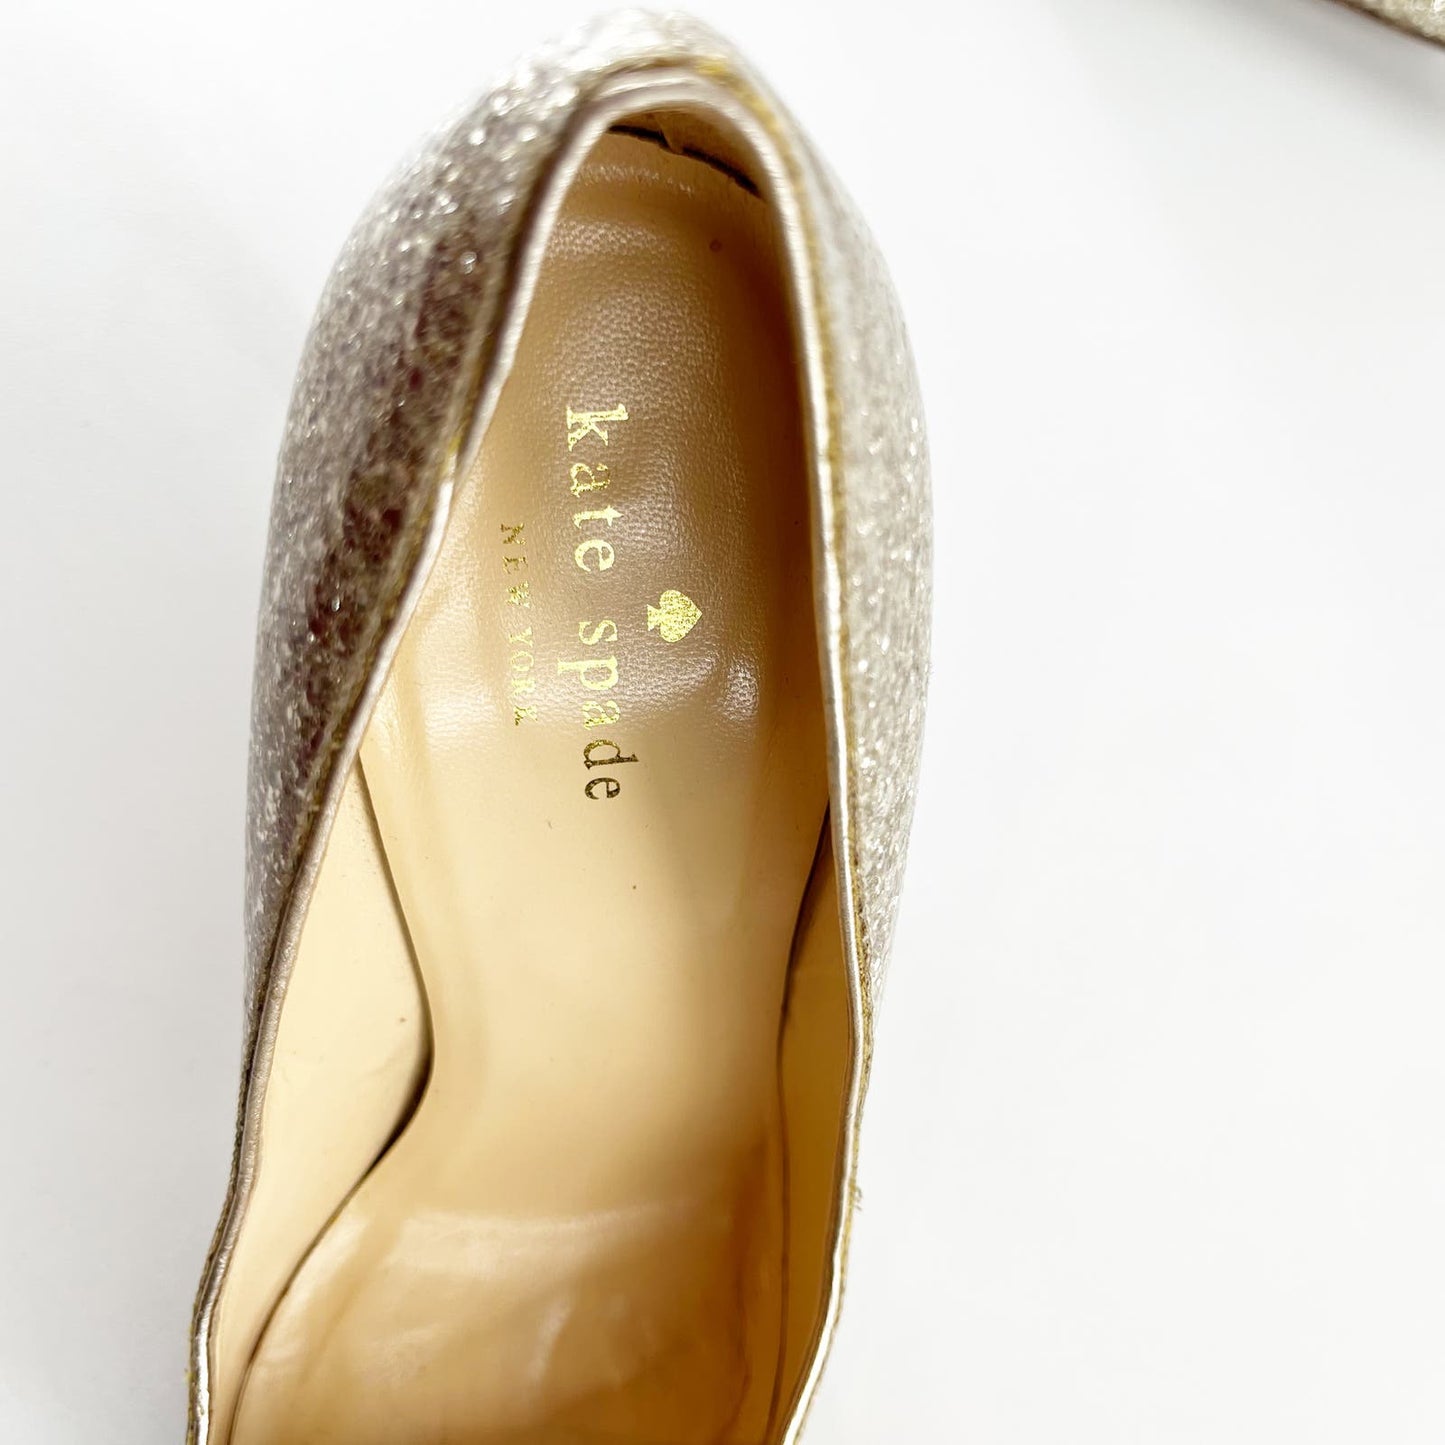 Kate Spade Licorice Too Sequin Glitter Pointy Toe Pumps Heels Gold 8